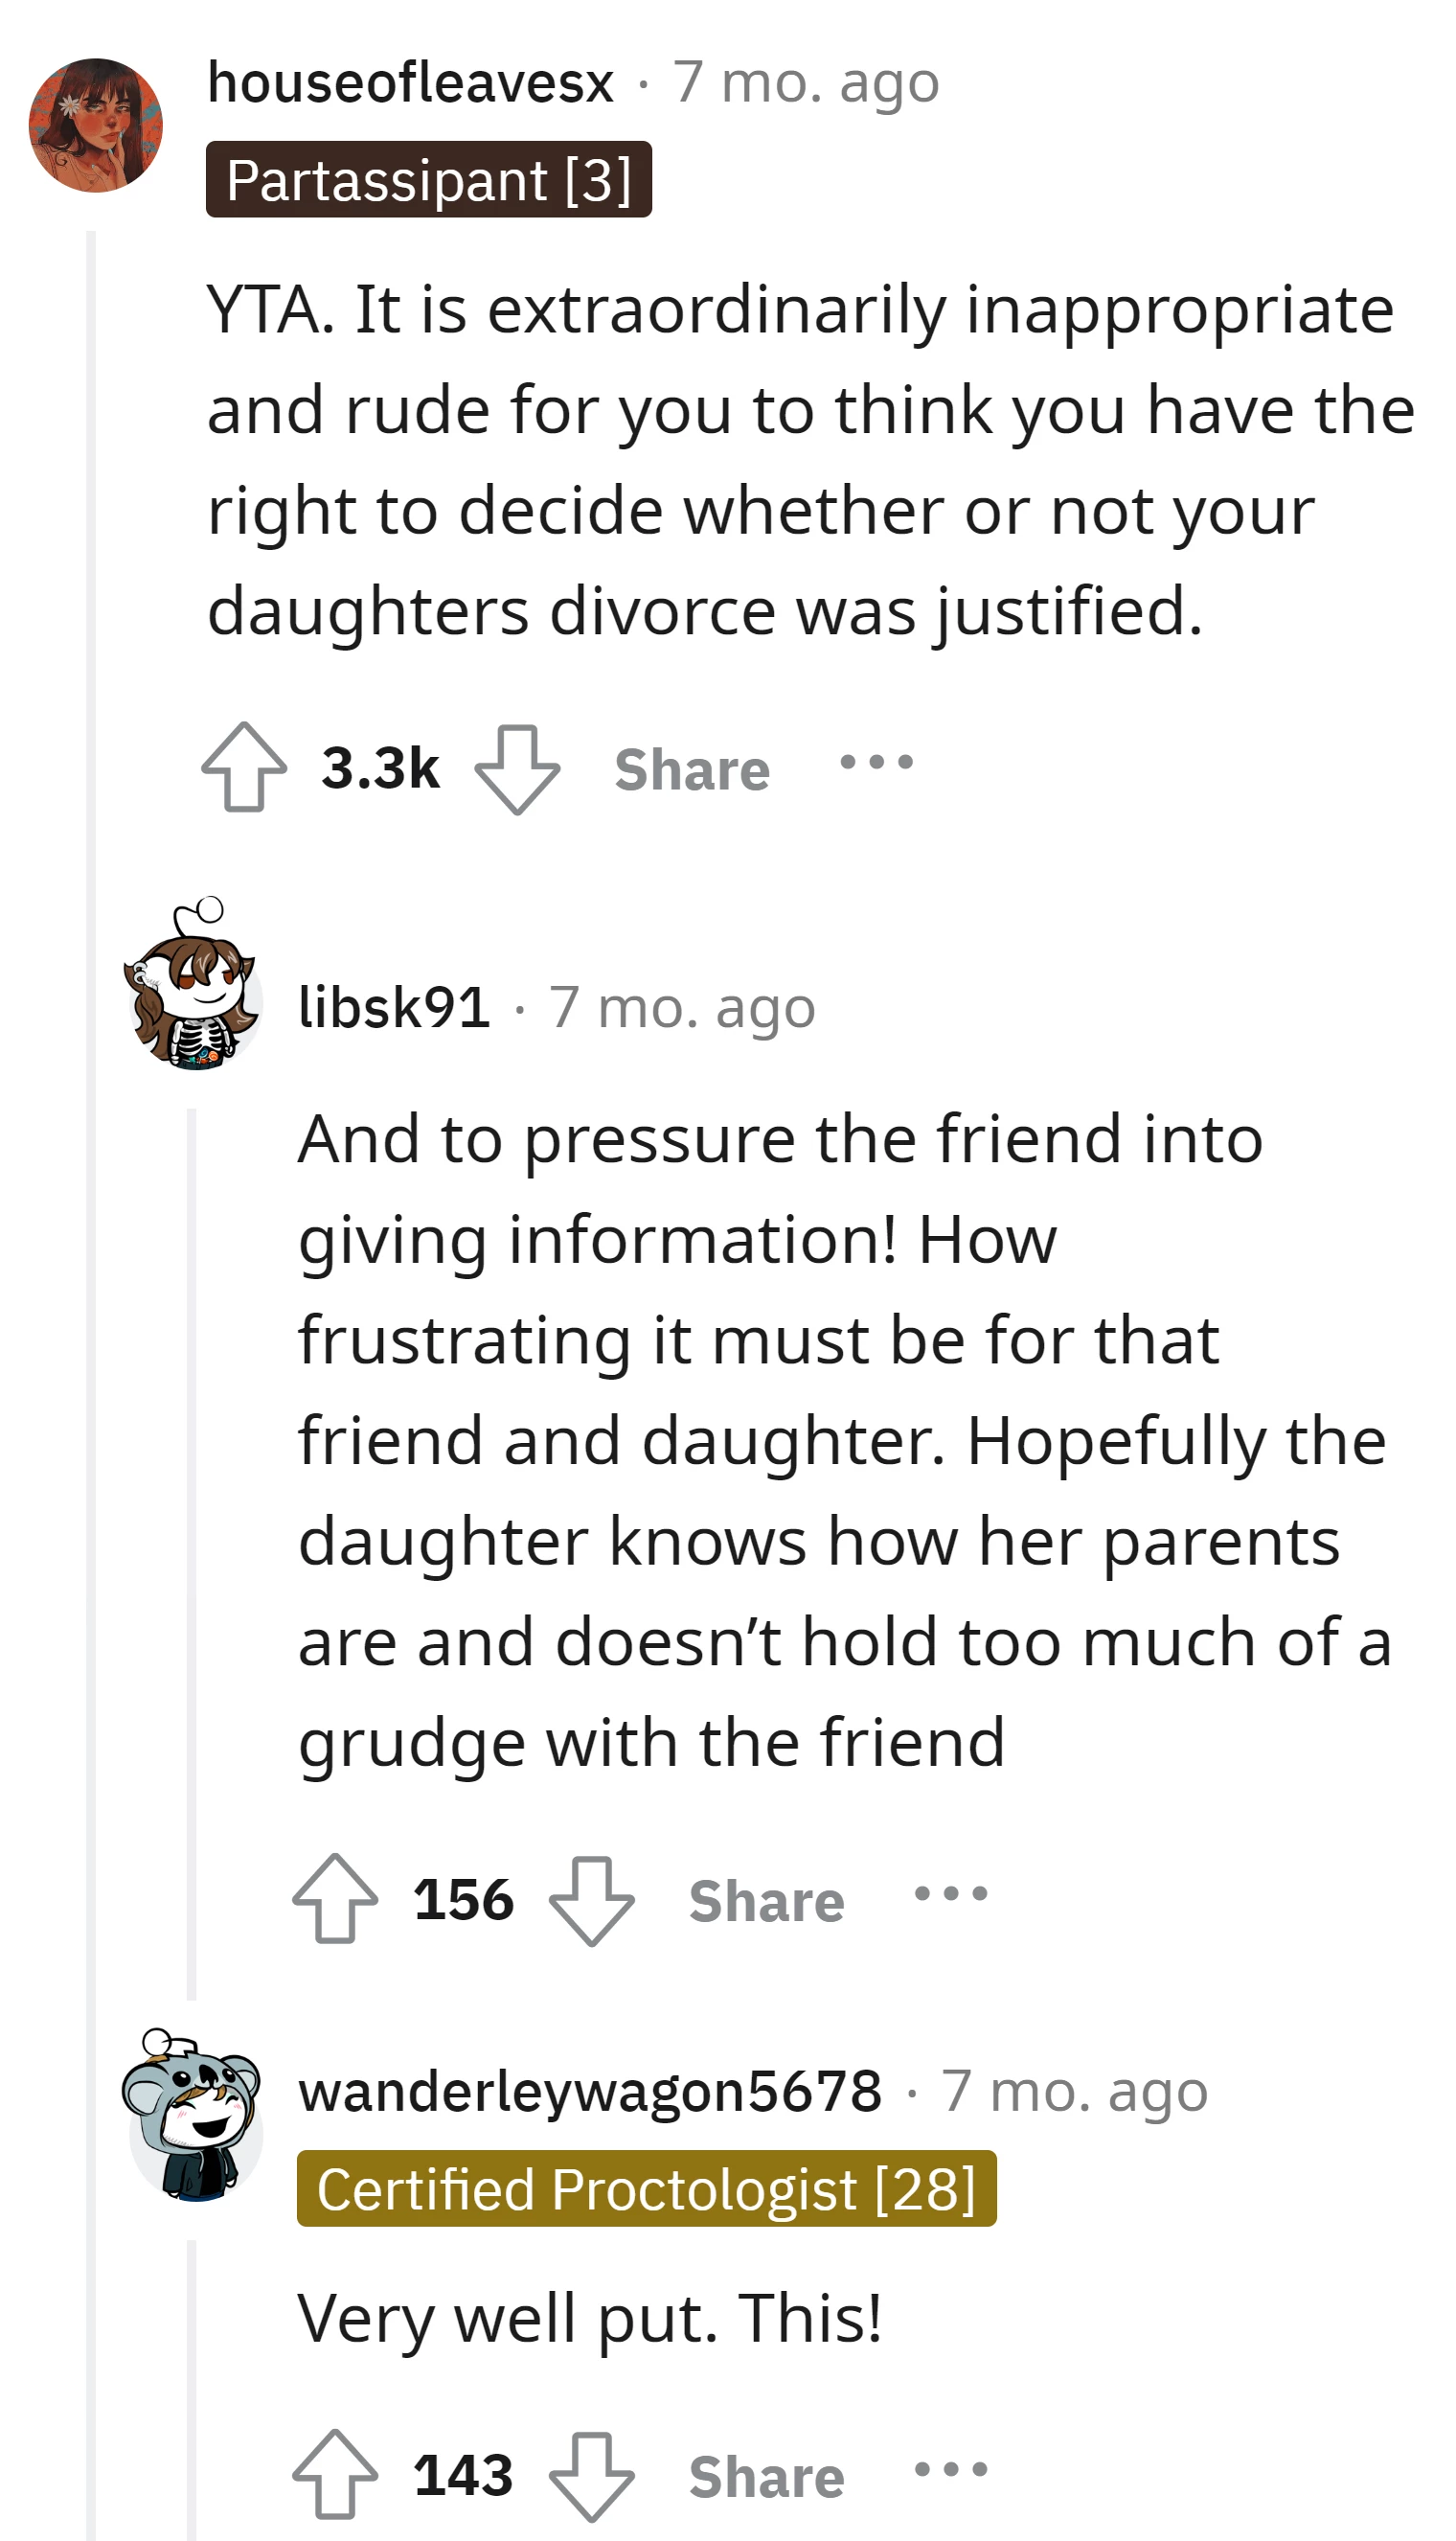 Commenter expressed disapproval for the perceived intrusion into the daughter's personal life